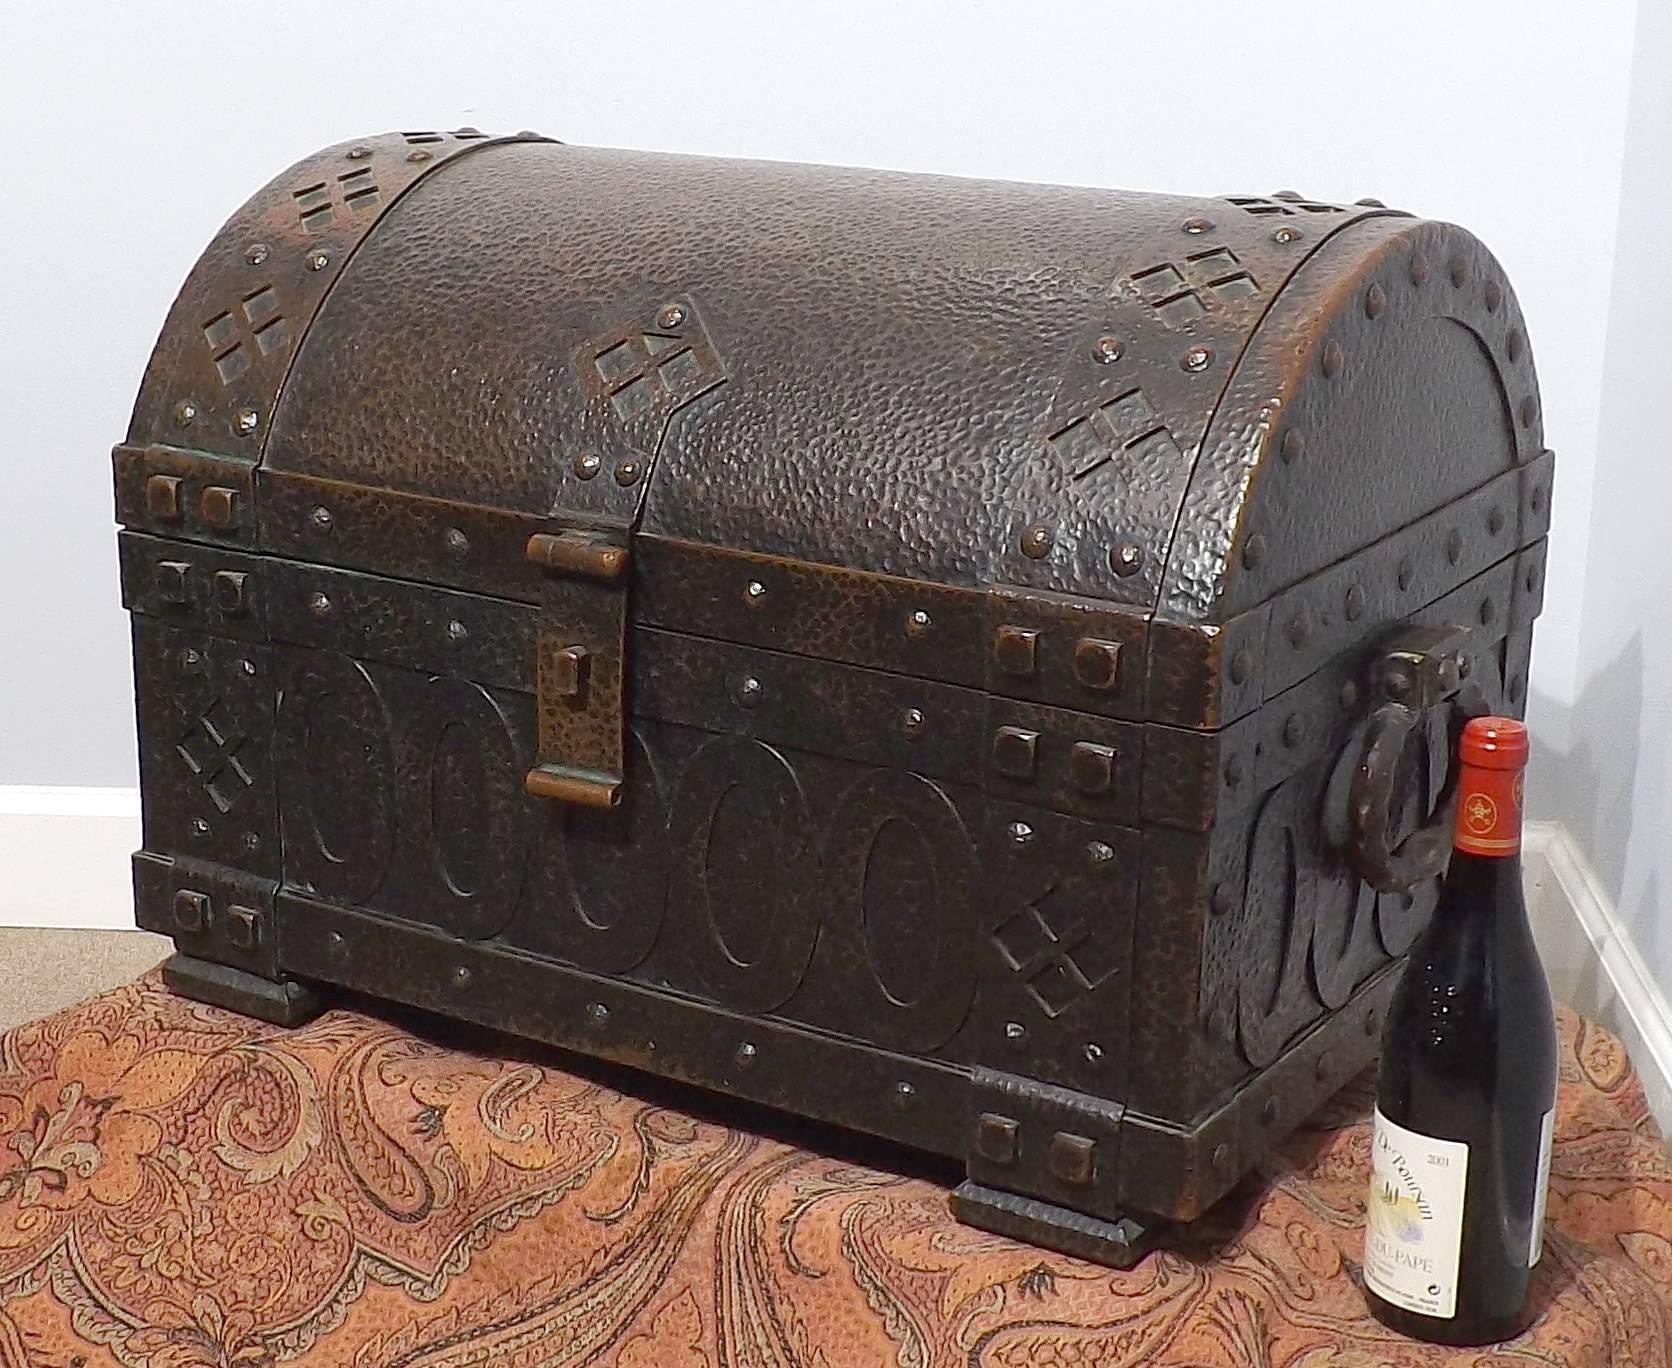 Large heavy hammered copper Arts and Crafts arched top chest. Handmade by a master metalsmith during the late 19th century, of European origin. Heavy strapping’s and large rivets encompass the strongbox. A centered locking clasp adorns the front.